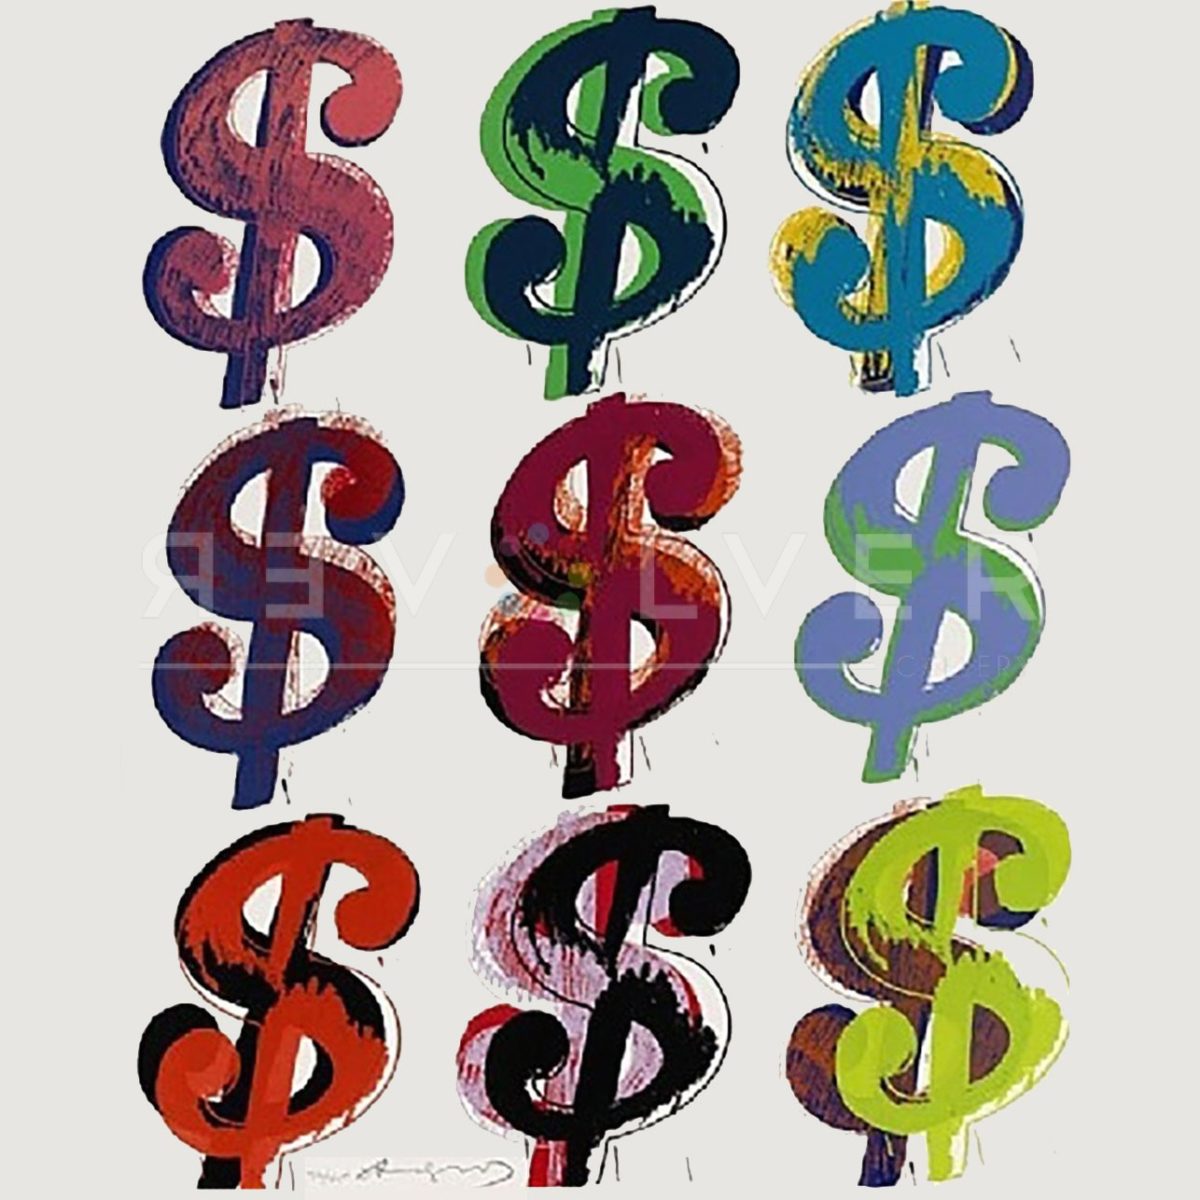 Dollar Sign (9) 286 by Andy Warhol. 9 Dollar Signs on white background.